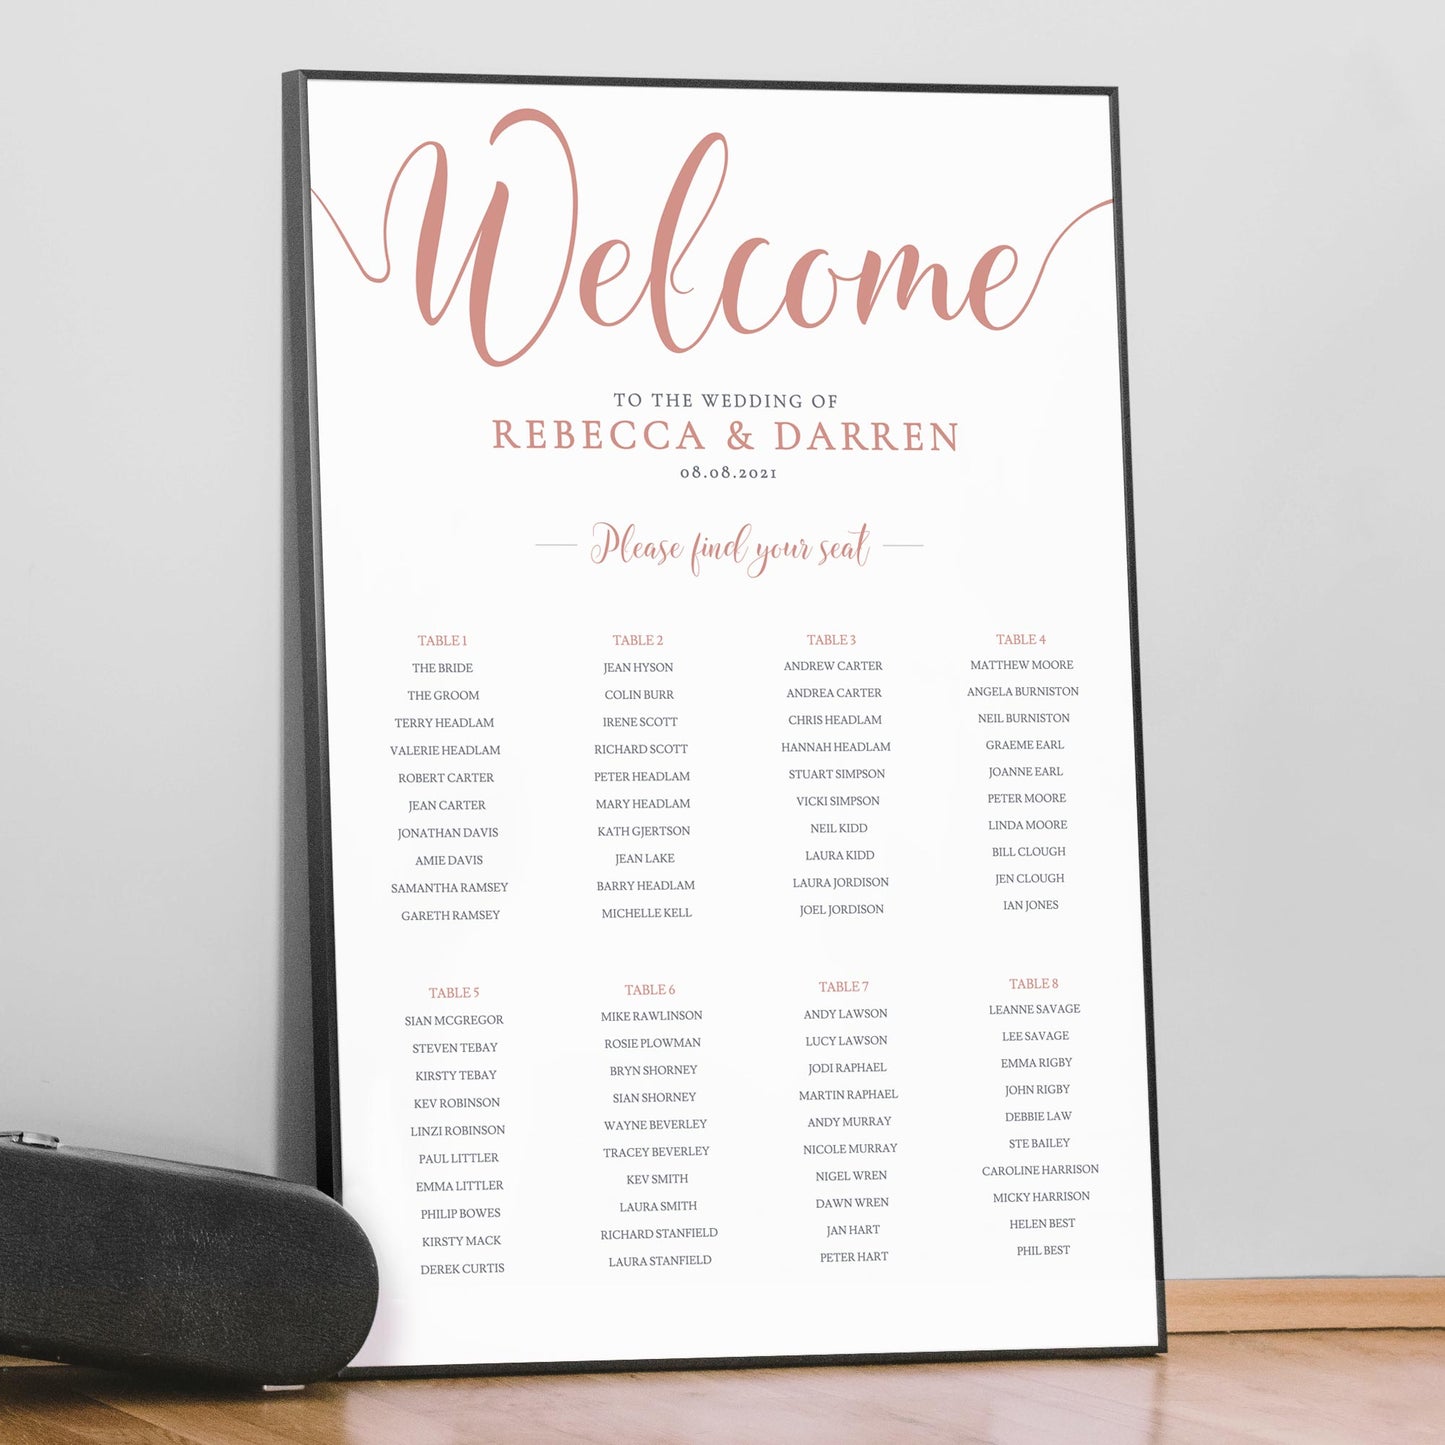 A1 rose gold seating plan in a large black frame